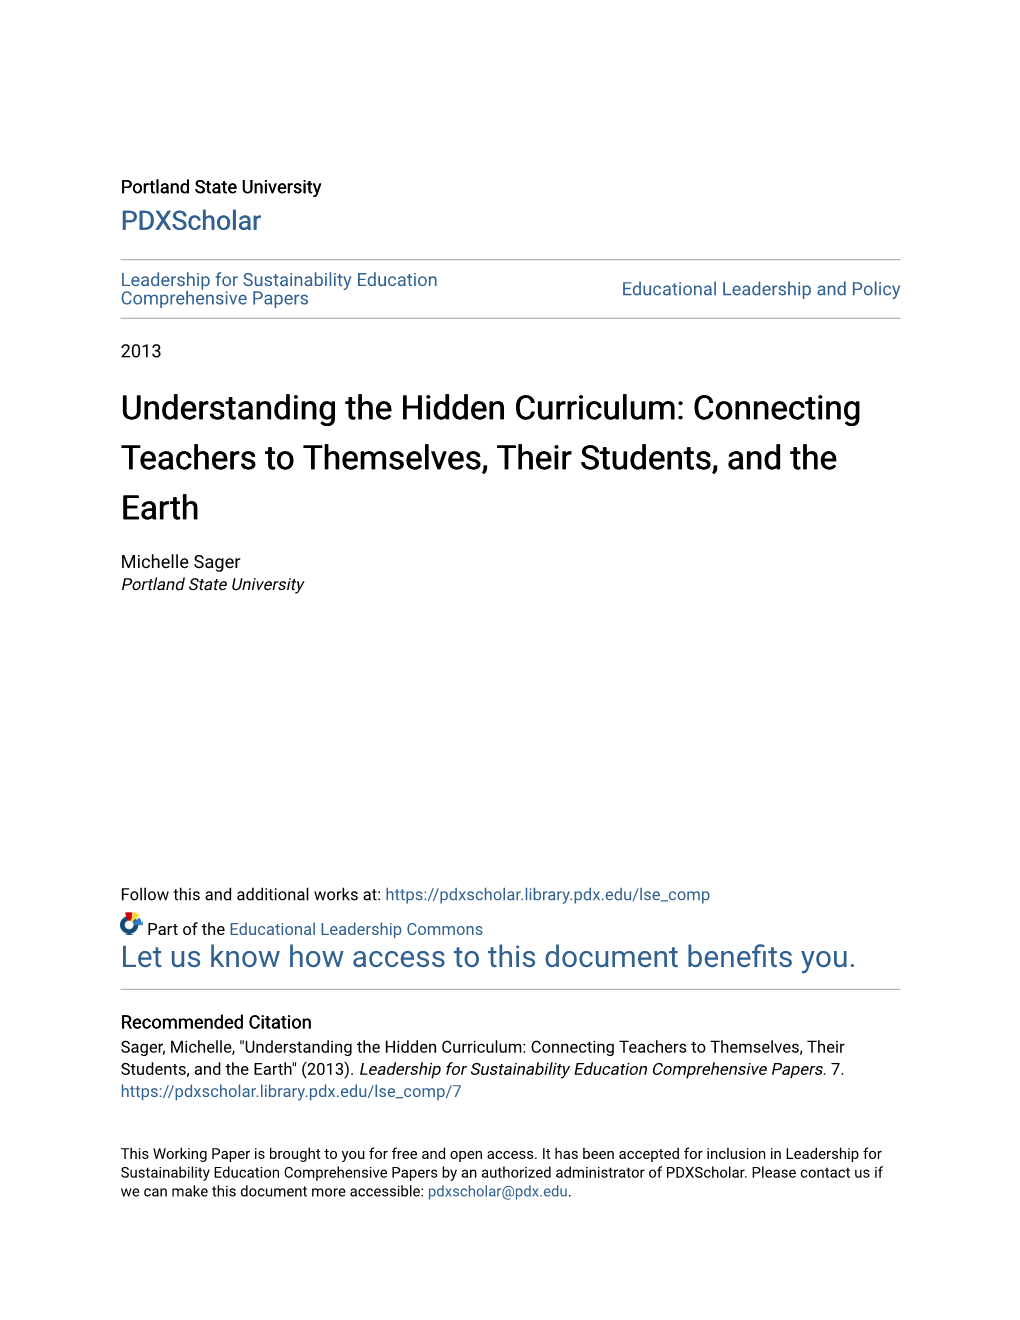 Understanding the Hidden Curriculum: Connecting Teachers to Themselves, Their Students, and the Earth